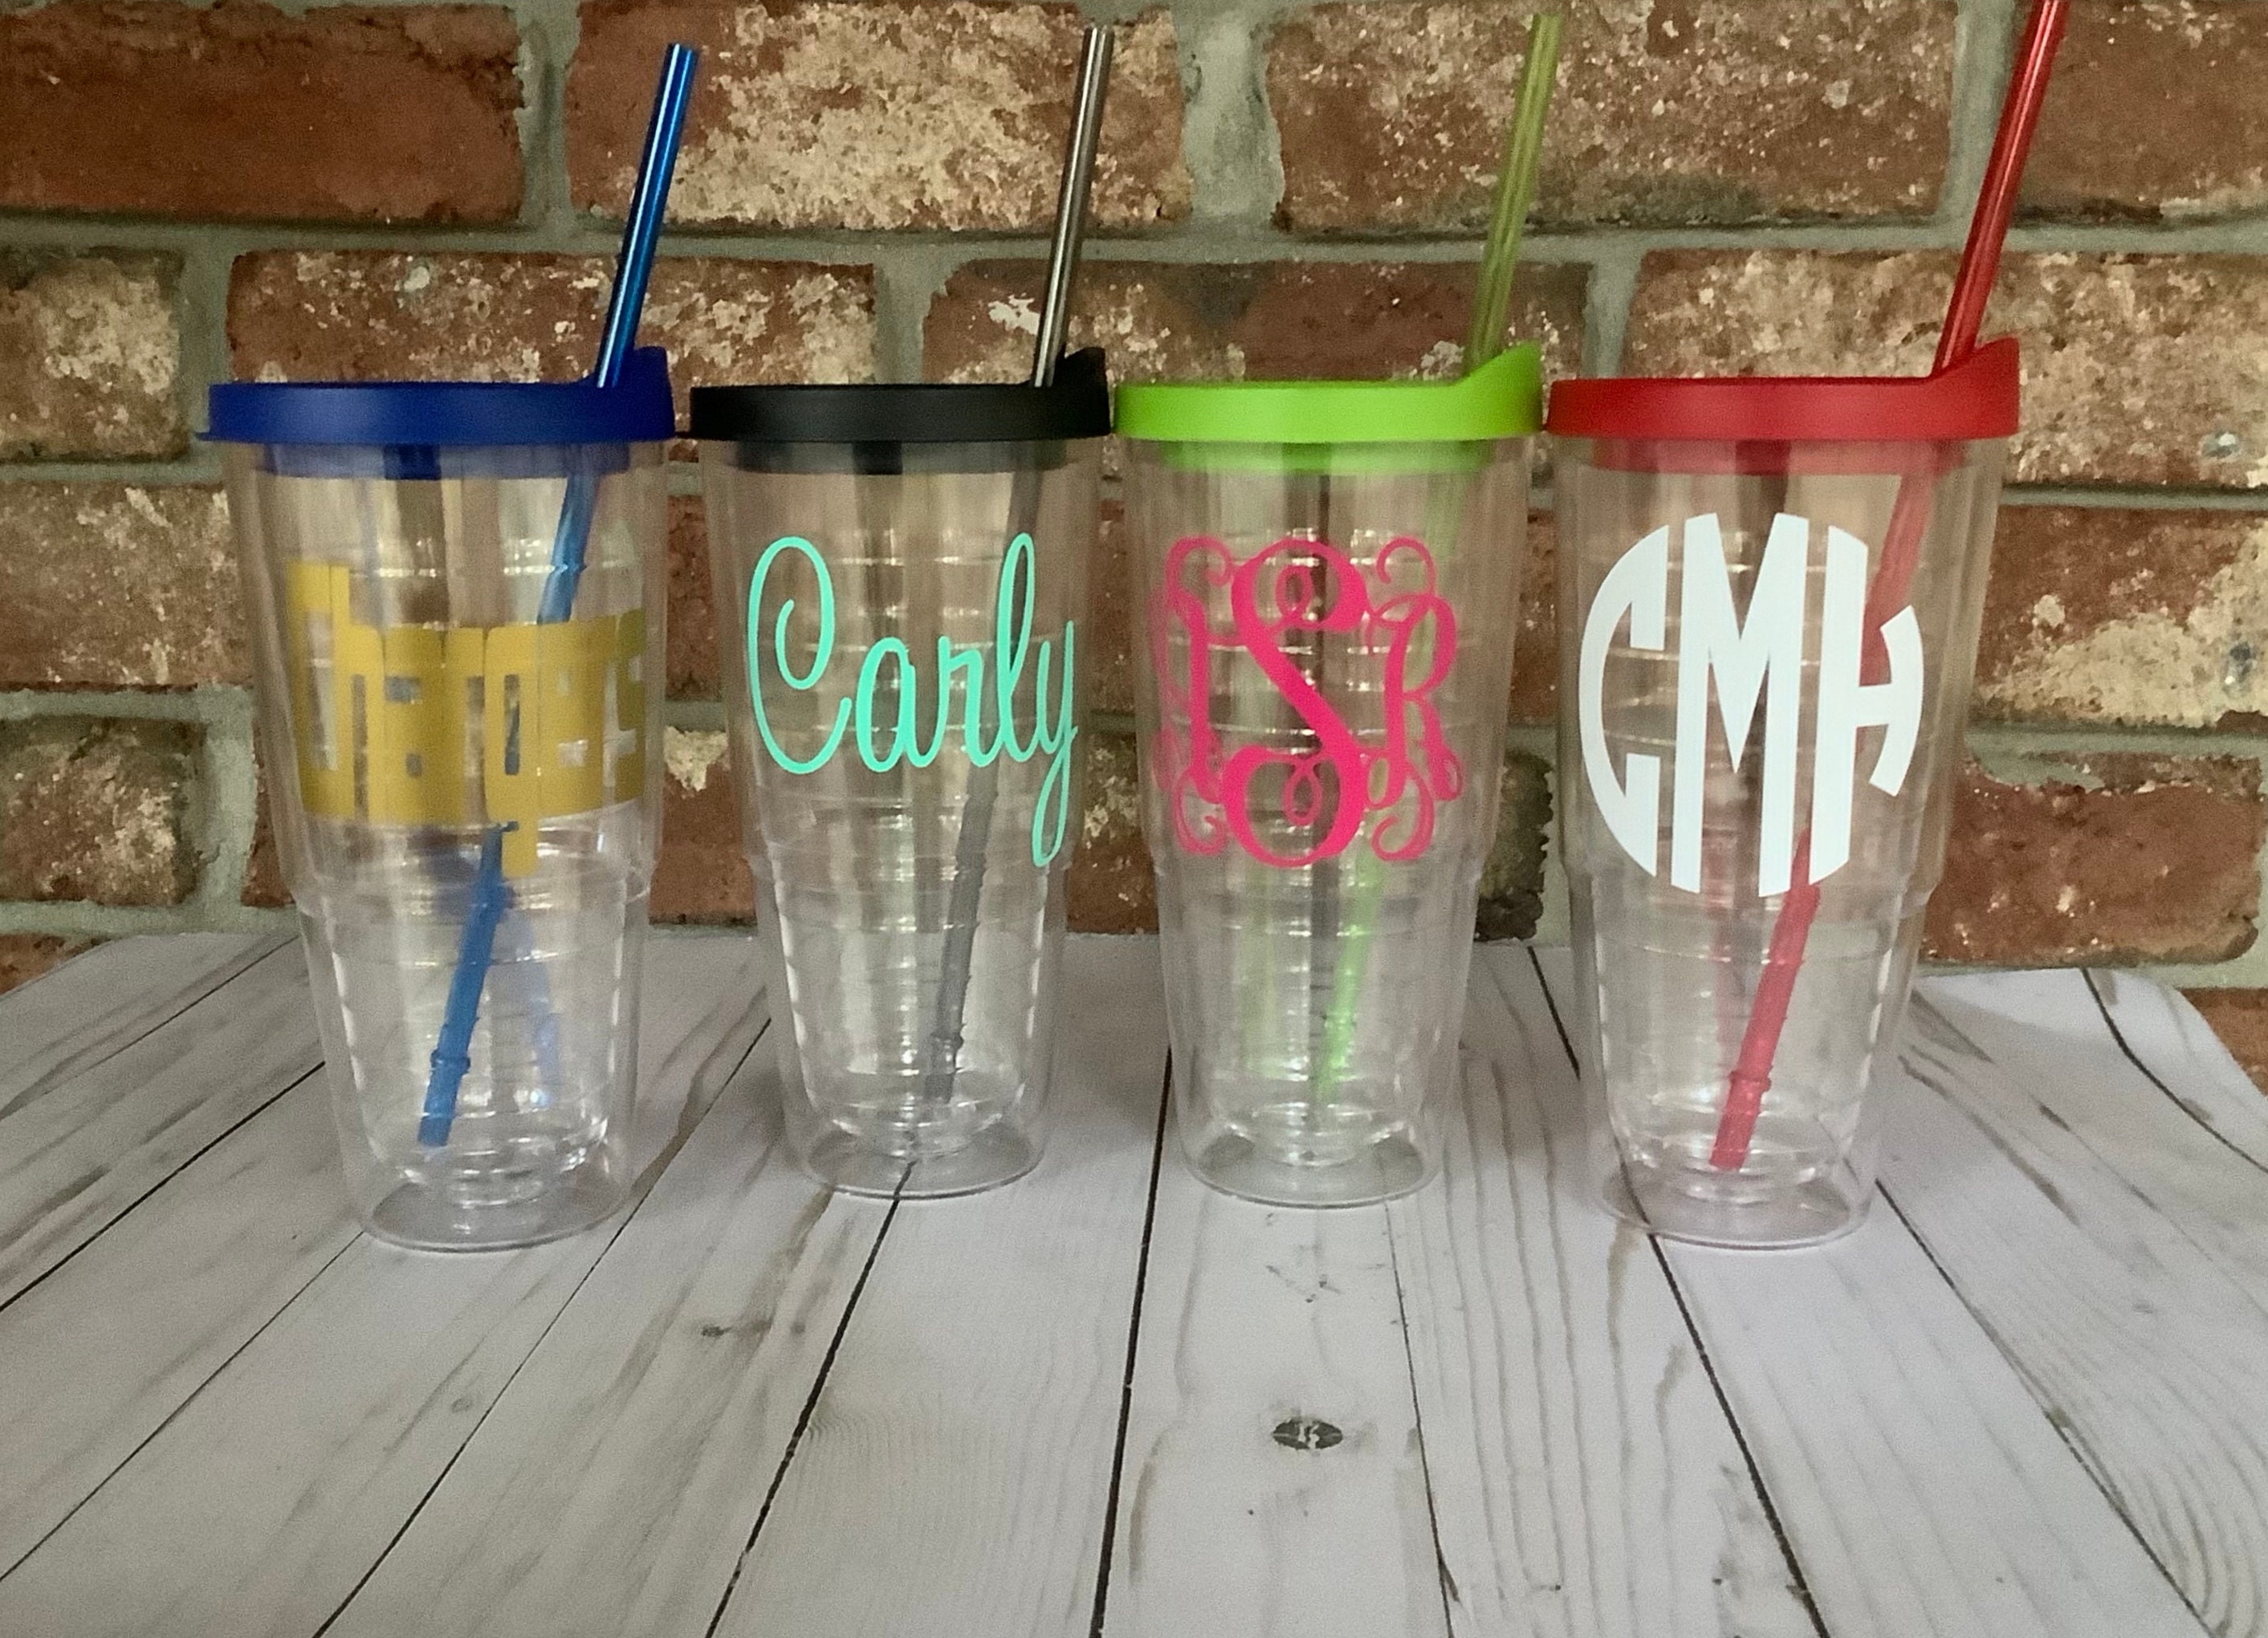 Custom Lake House 16oz Double Wall Acrylic Tumbler with Lid & Straw - Full  Print (Personalized)